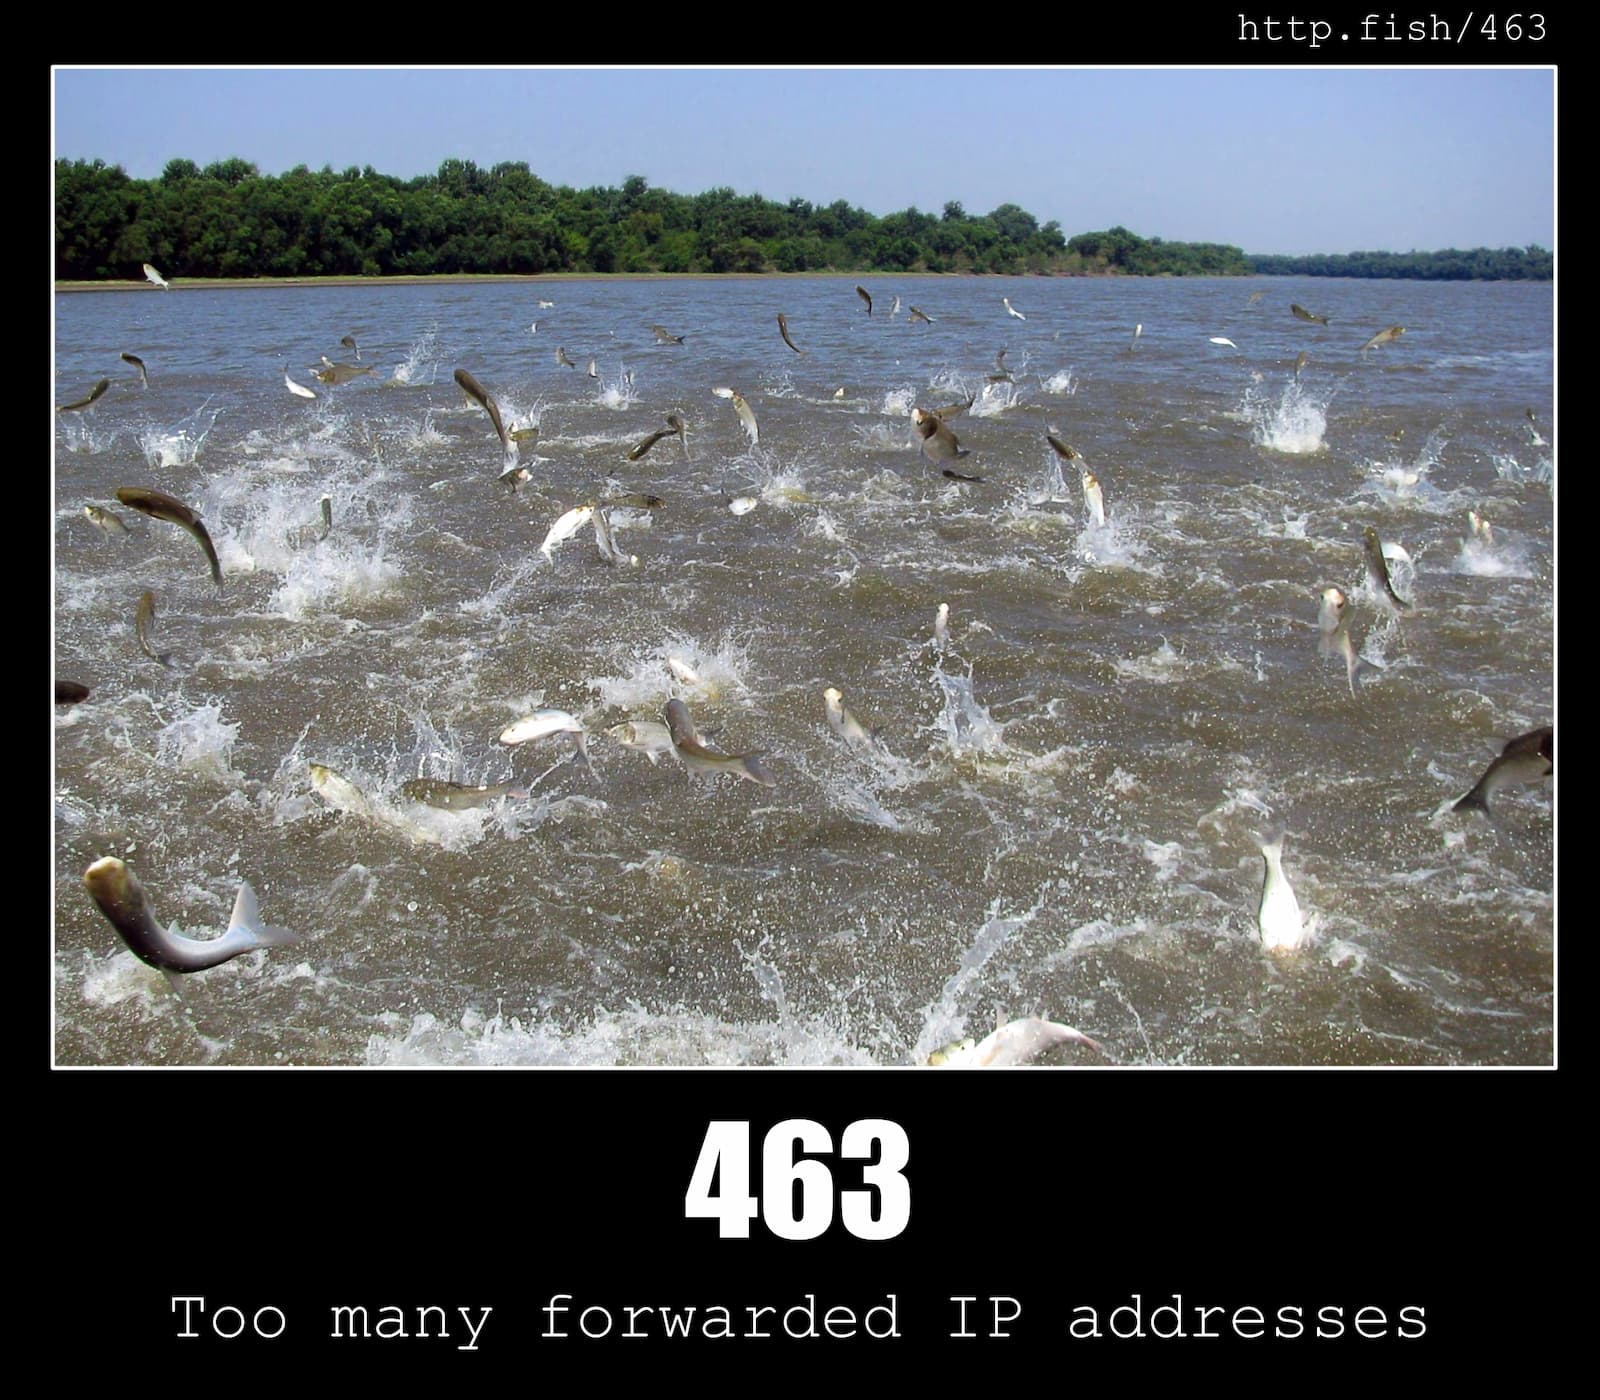 HTTP Status Code 463 Too many forwarded IP addresses & Fish